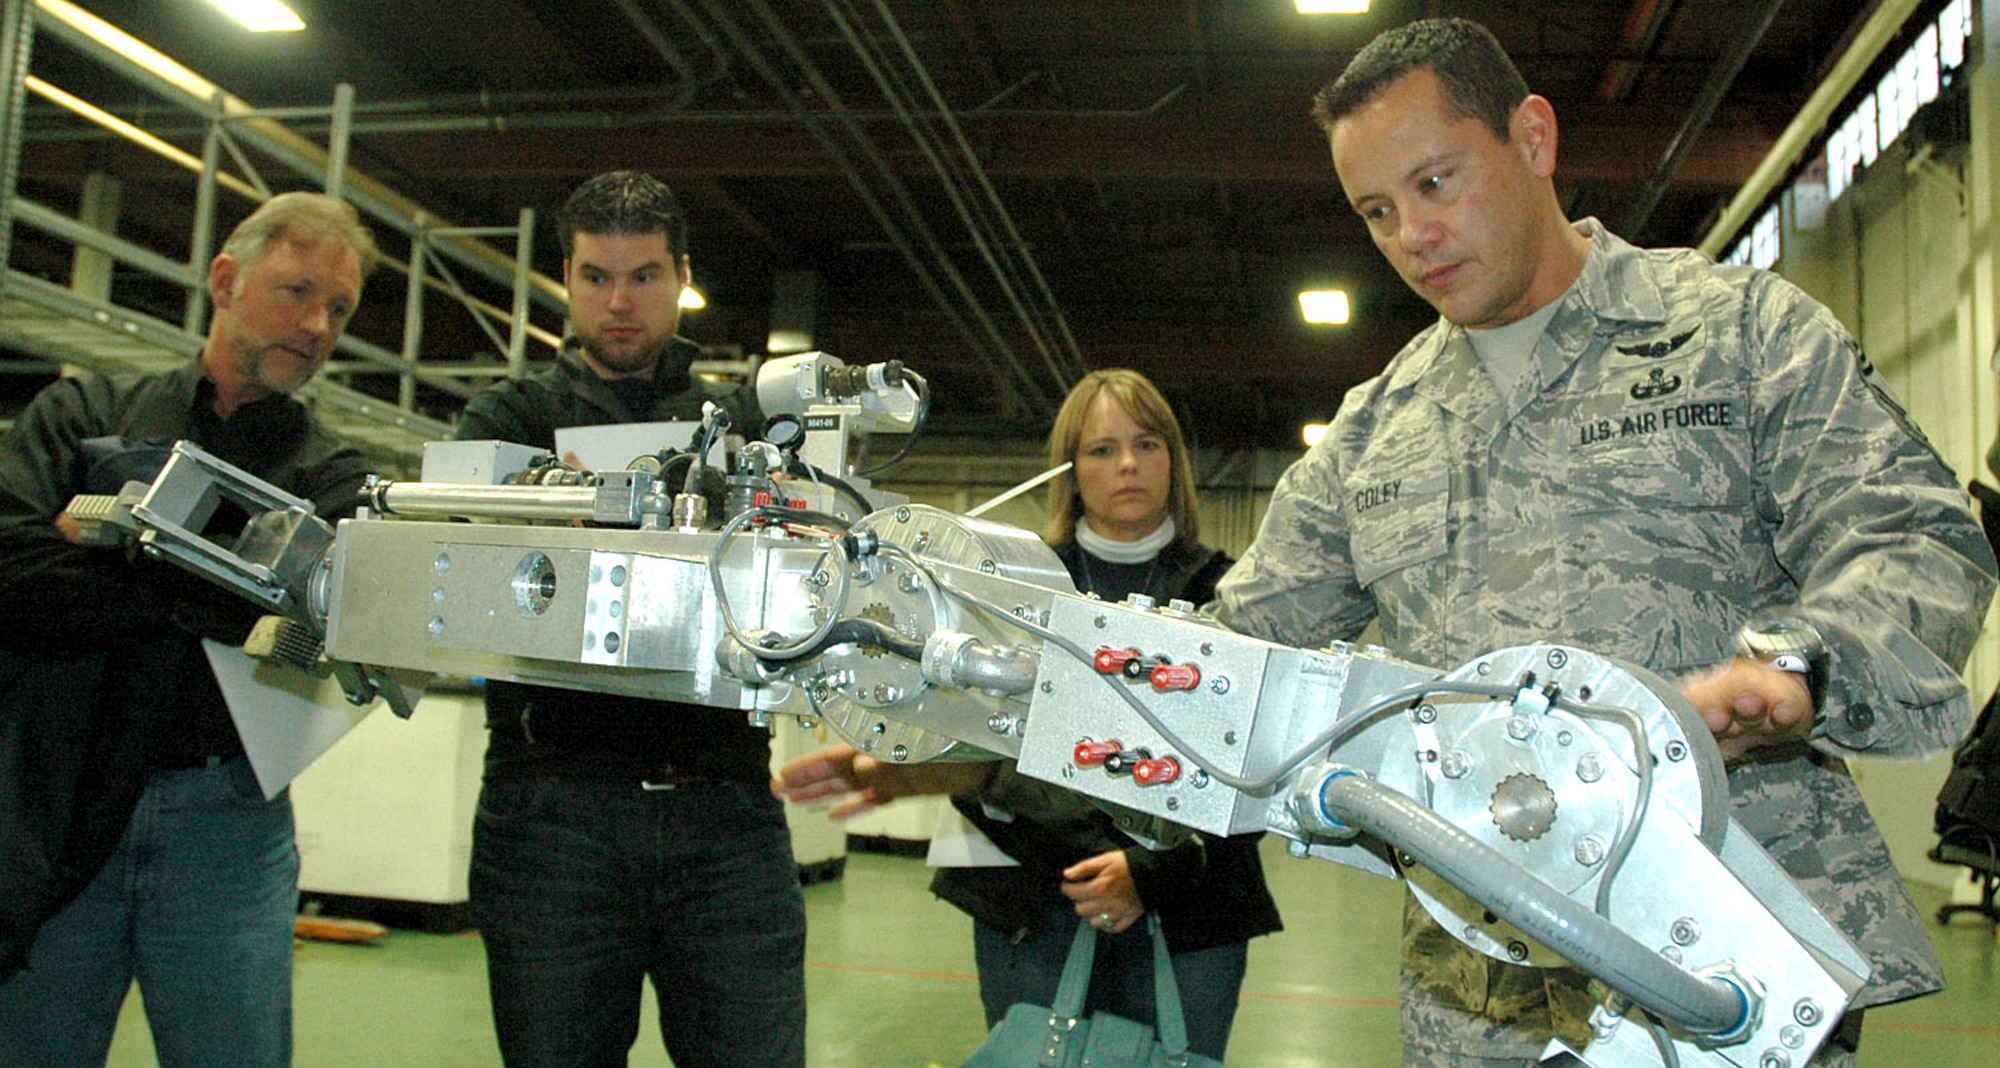 Chief Master Sgt. James "Mitch" Coley, 446th Civil Engineer Squadron Explosive Ordnance Disposal Flight, shows civilian employers of Reservists how the Remotec robot works, during the 446th Airlift Wing Employer Orientation Day, Nov. 7 here. (U.S. Air Force photo/Staff Sgt. Nicole Celestine)